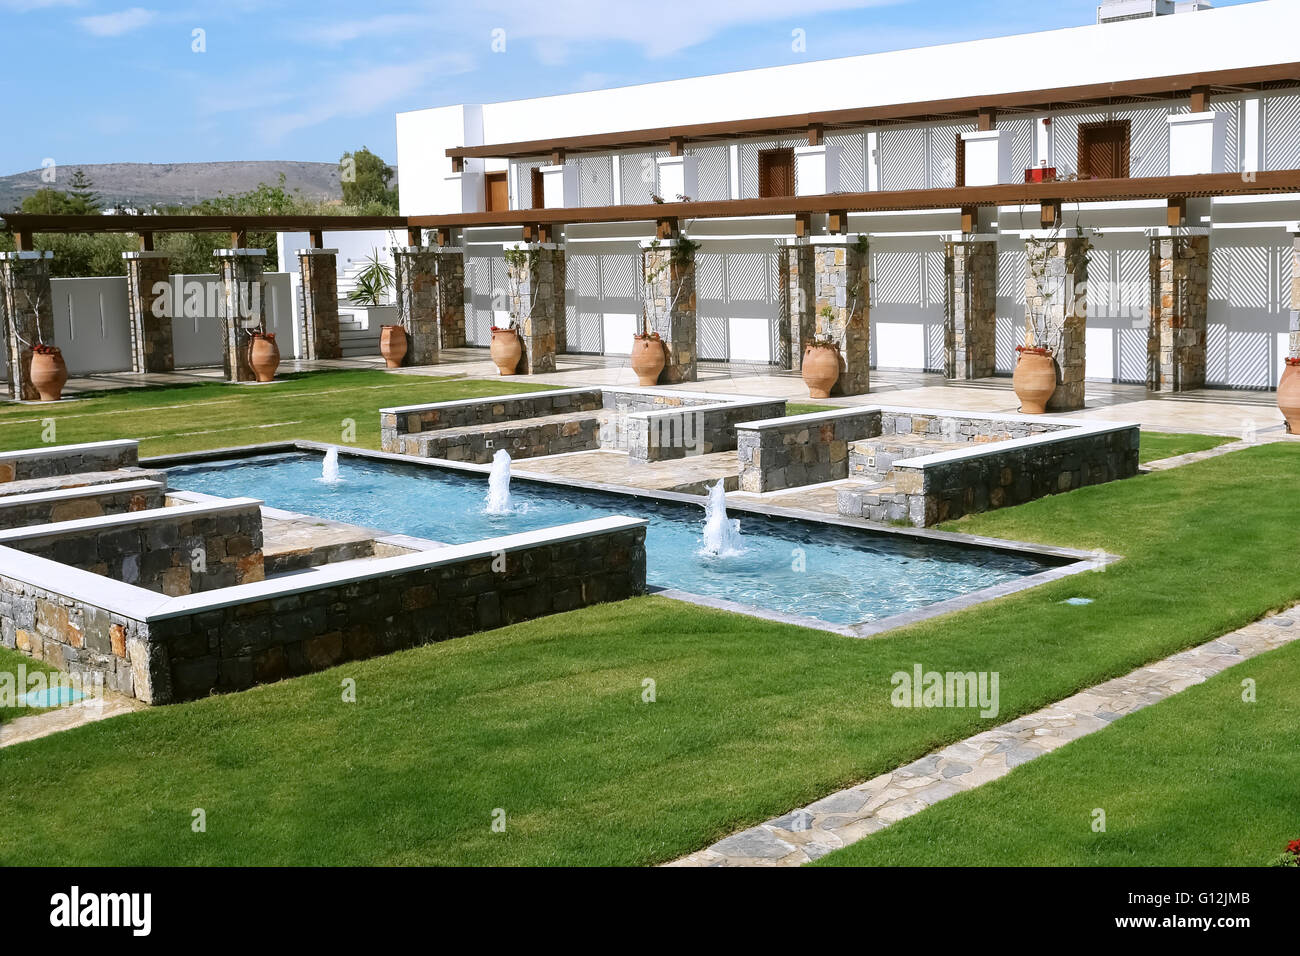 HERAKLION, CRETE, GREECE - MAY 13, 2014: The blue sky, modern building of villa with terraces, swimming-pool and fountains. Stock Photo